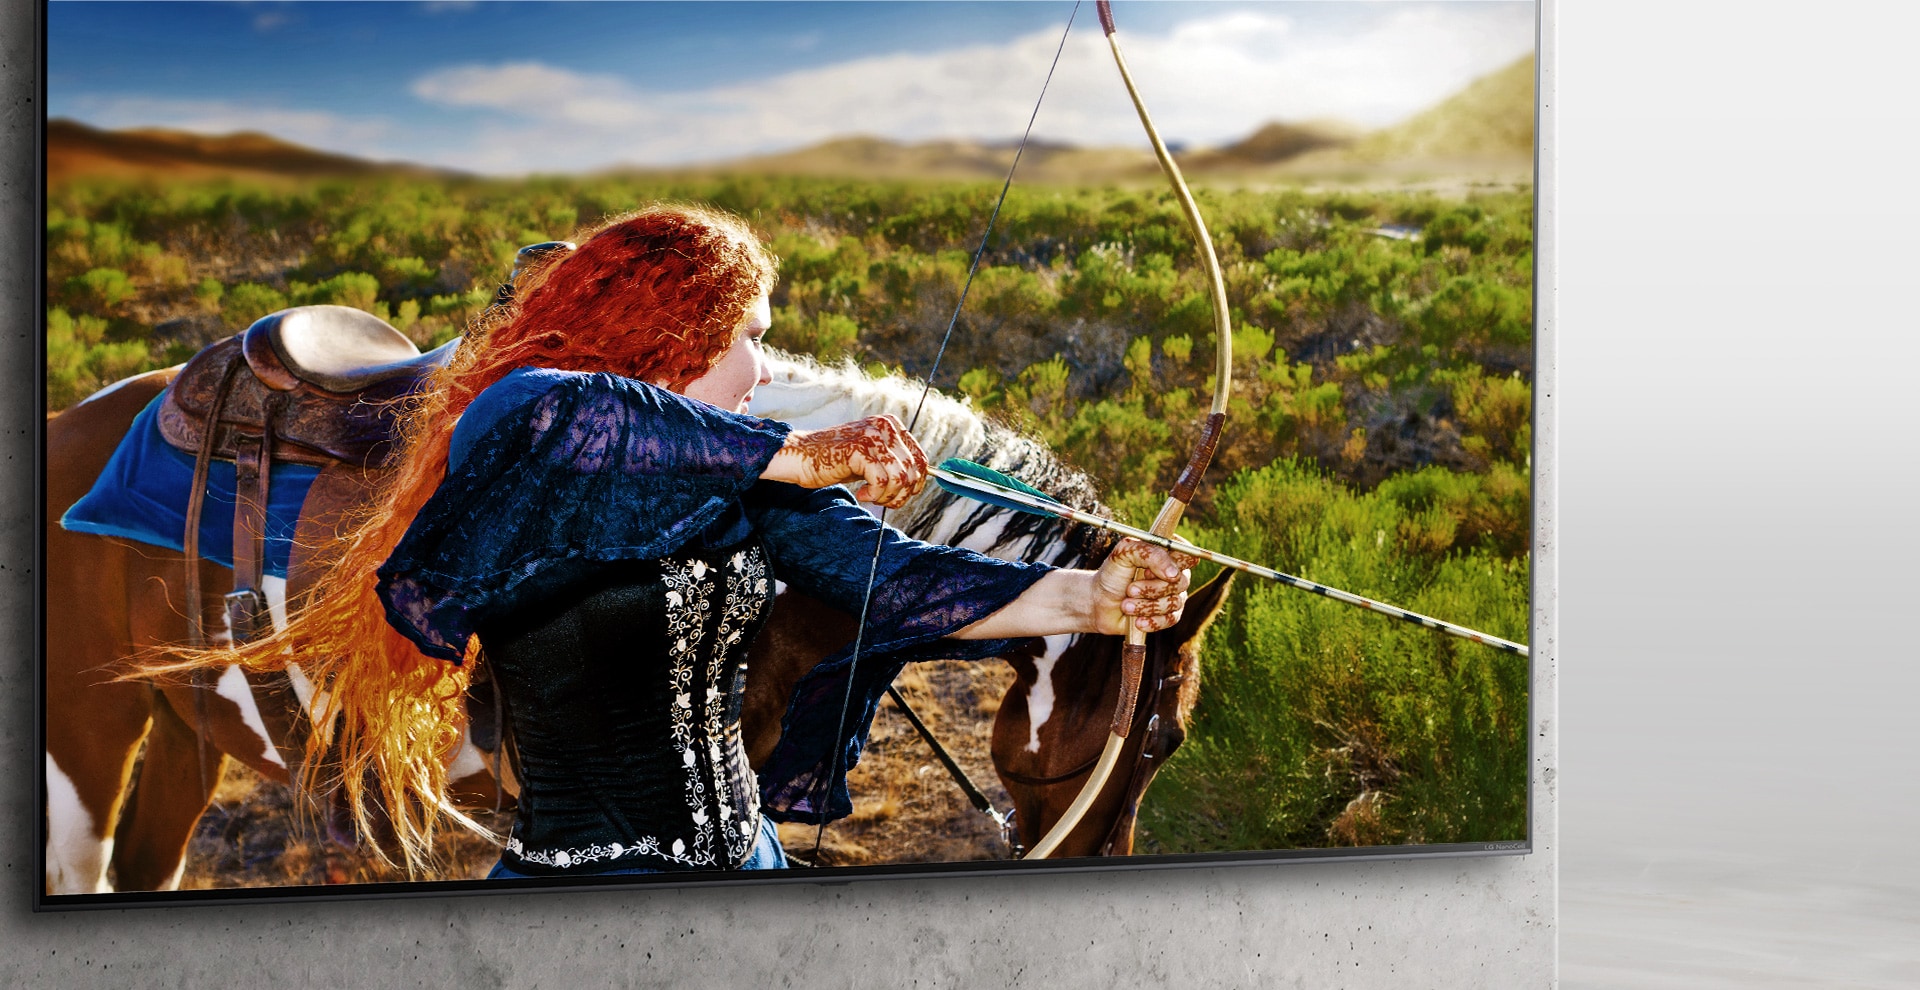 A Nanocell TV is hanging on a wall. On the screen, a medieval archer aims her bow.